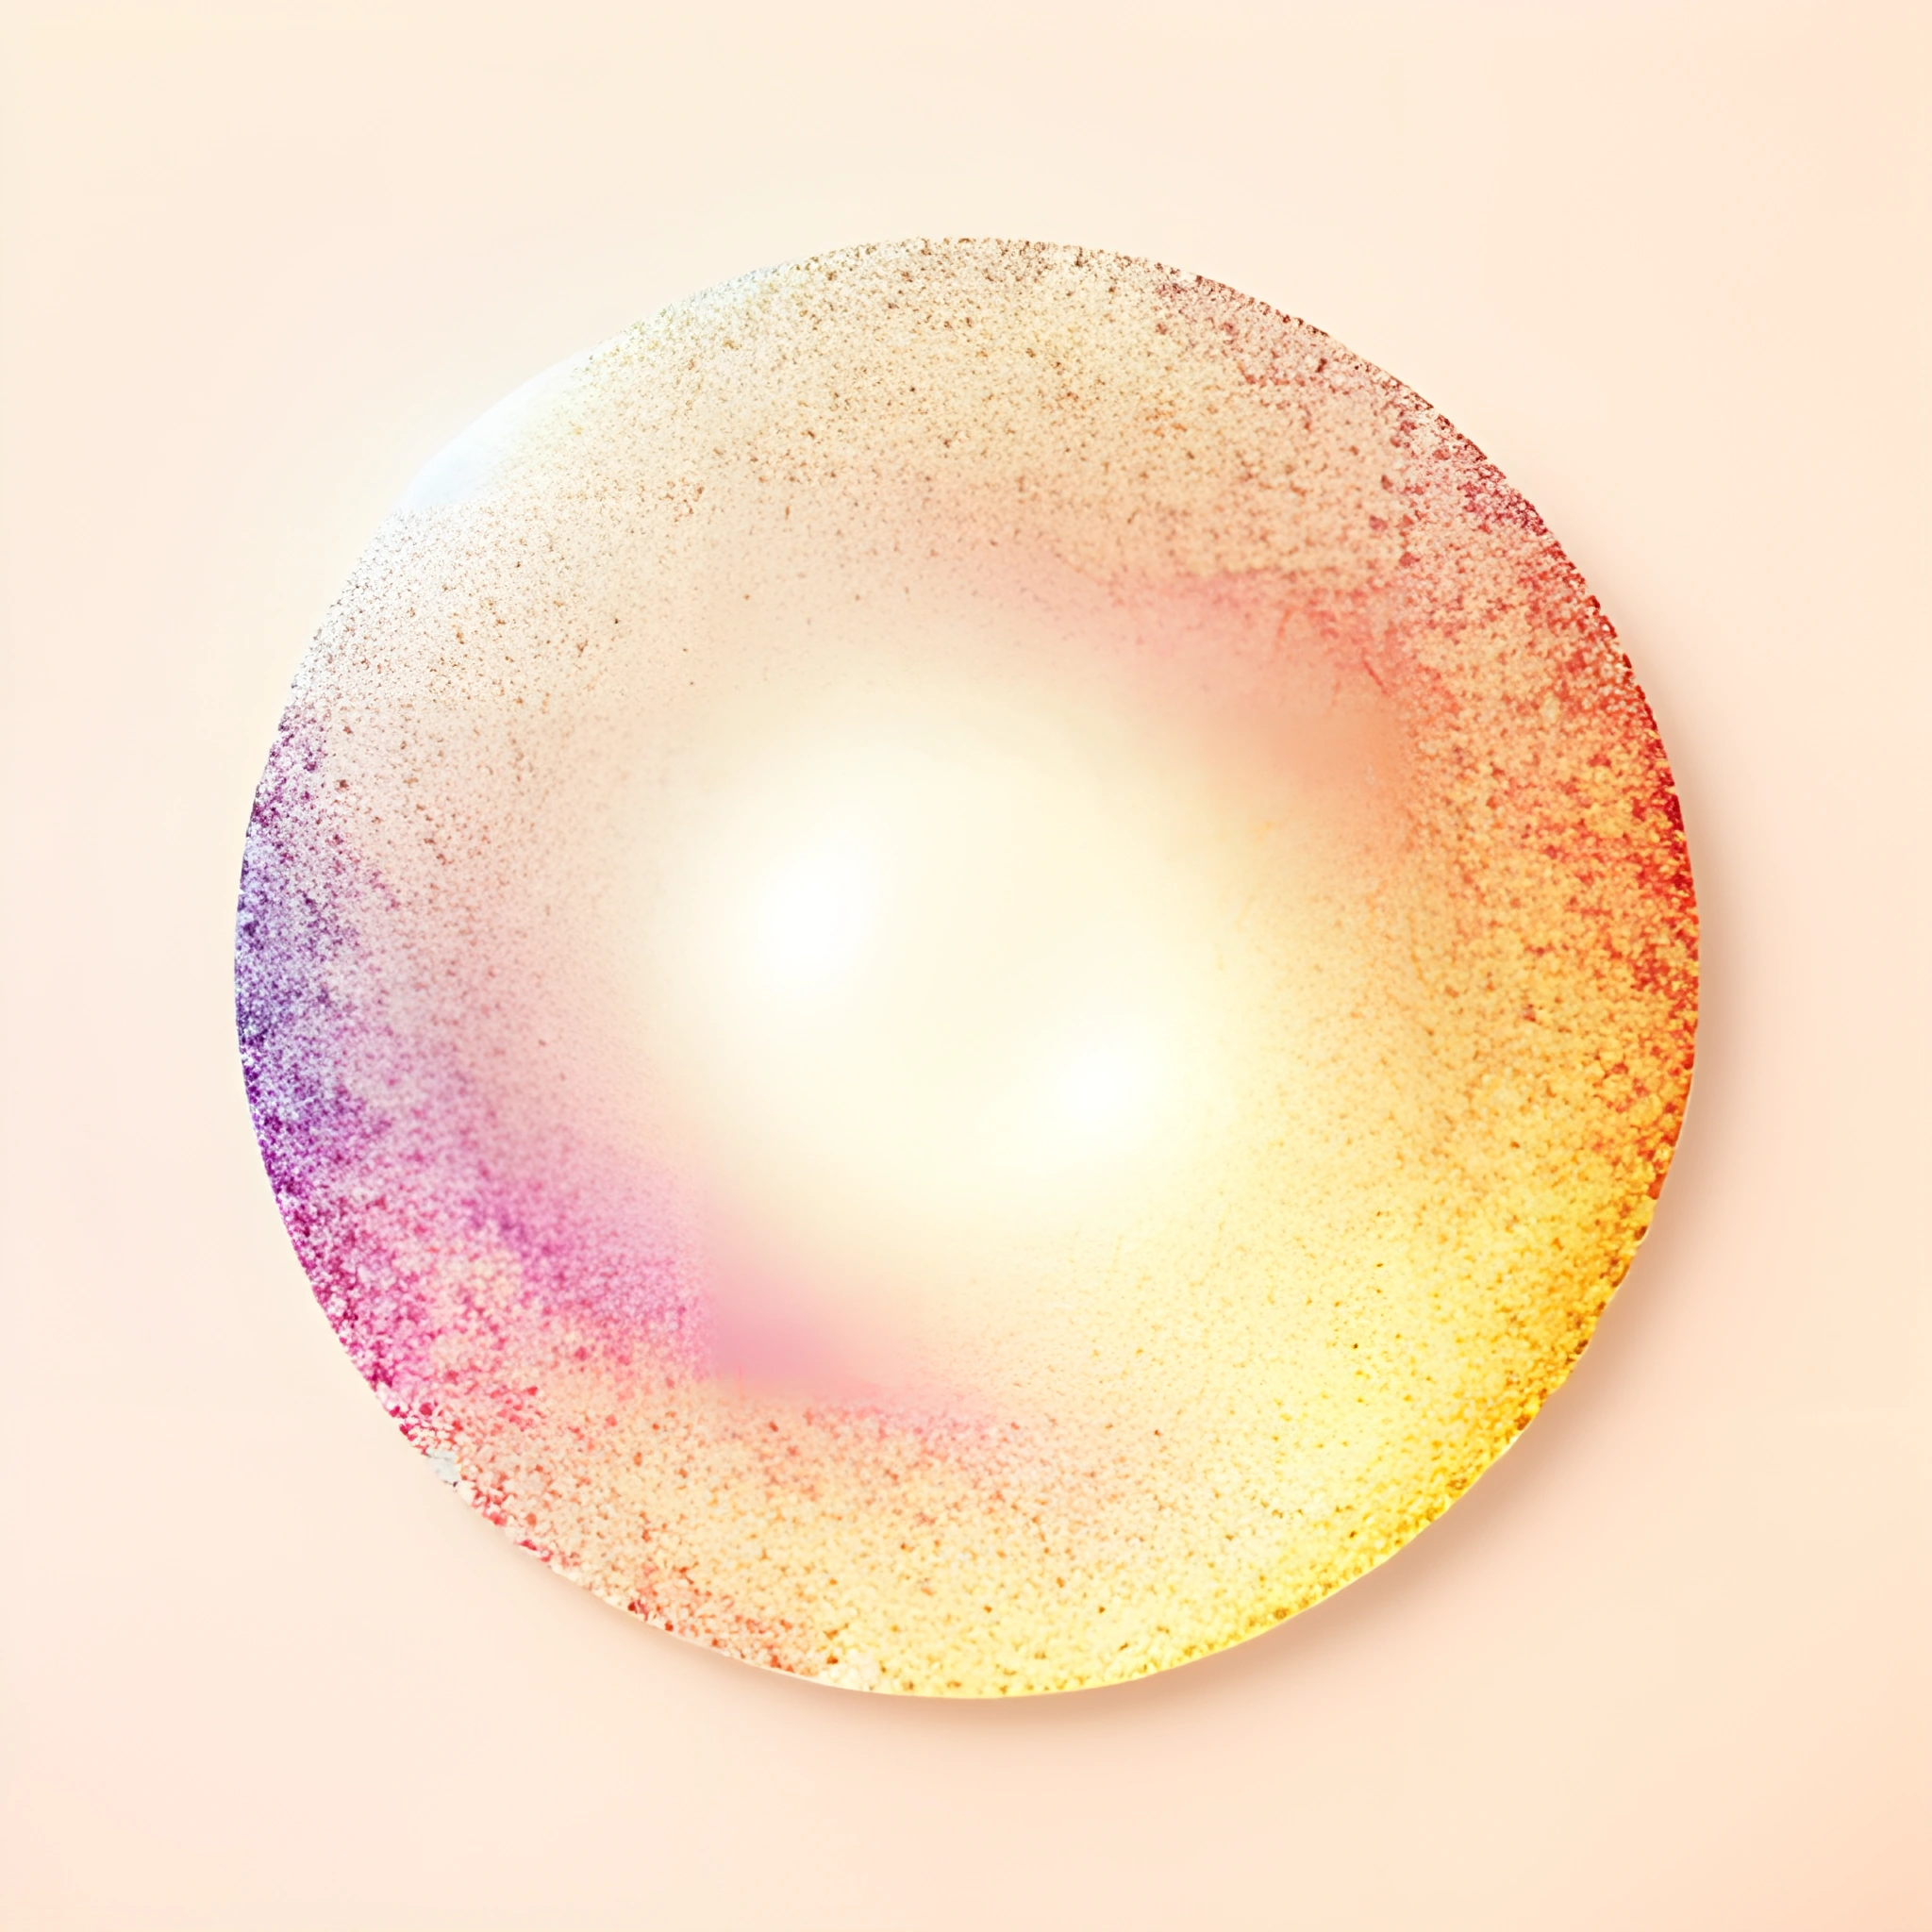 a colorful plate with a white background and a yellow center